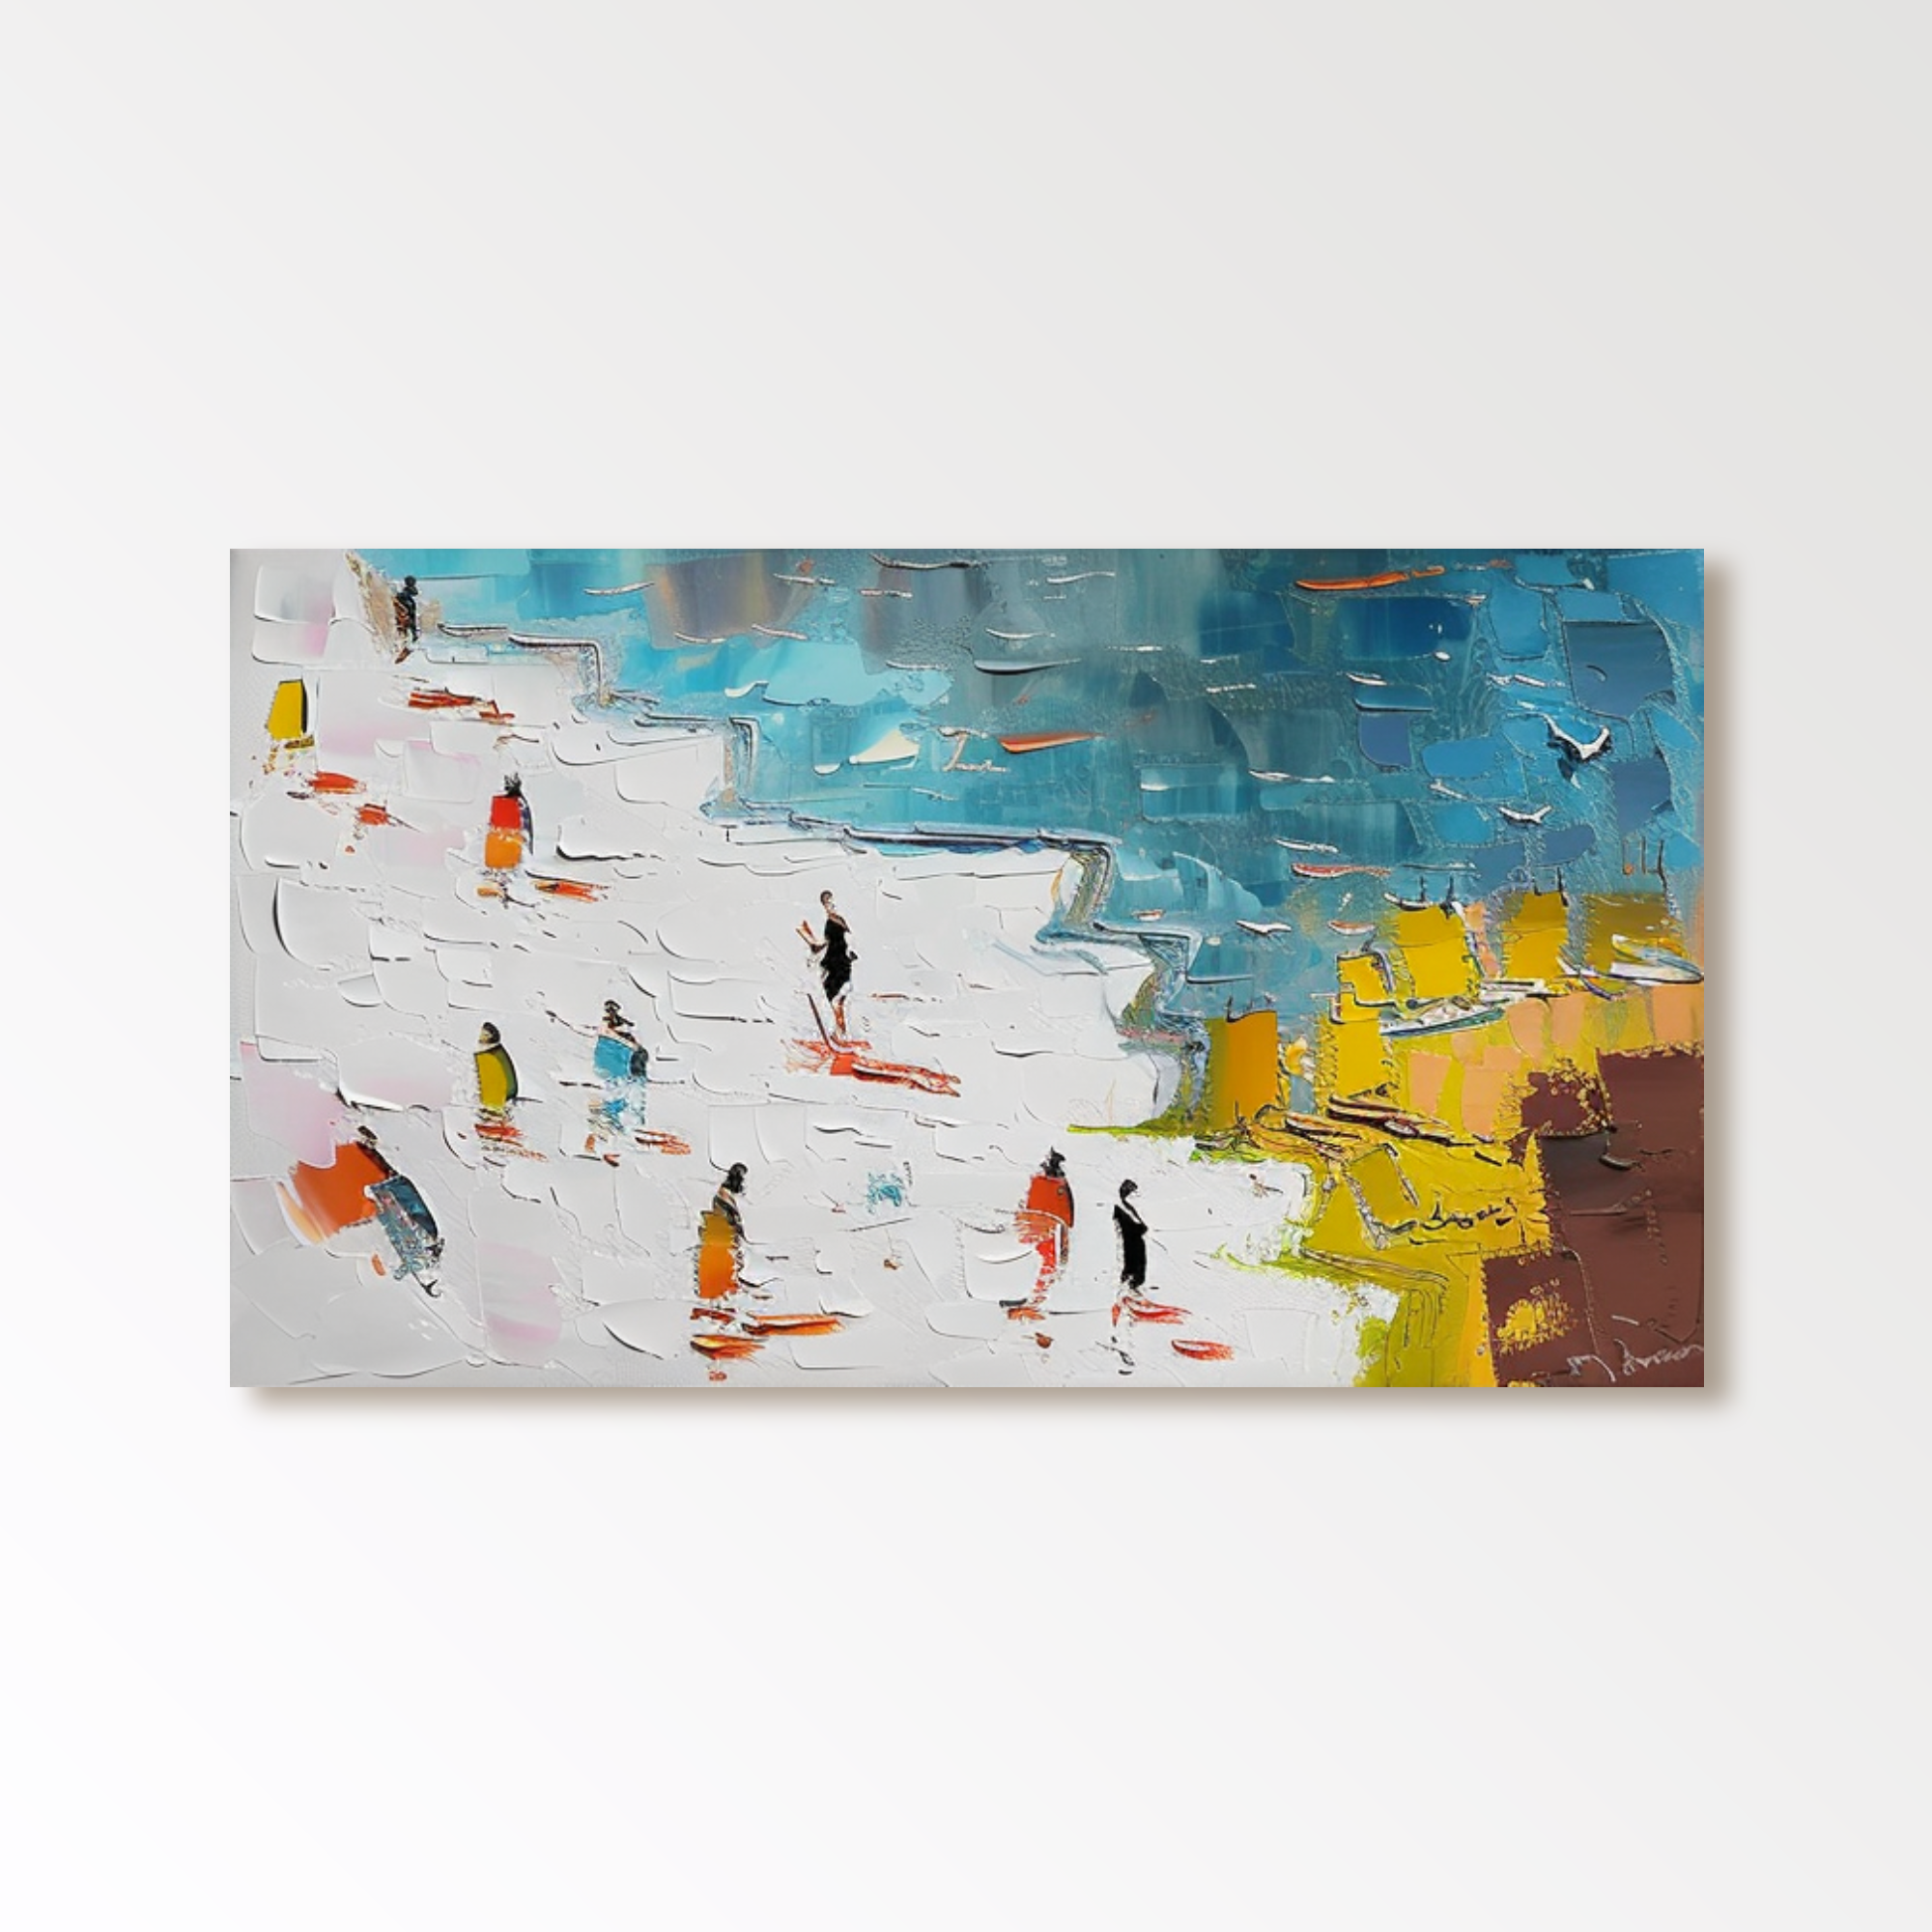 Acrylic Colorful Abstract Art Painting "Stroll by the Sea"